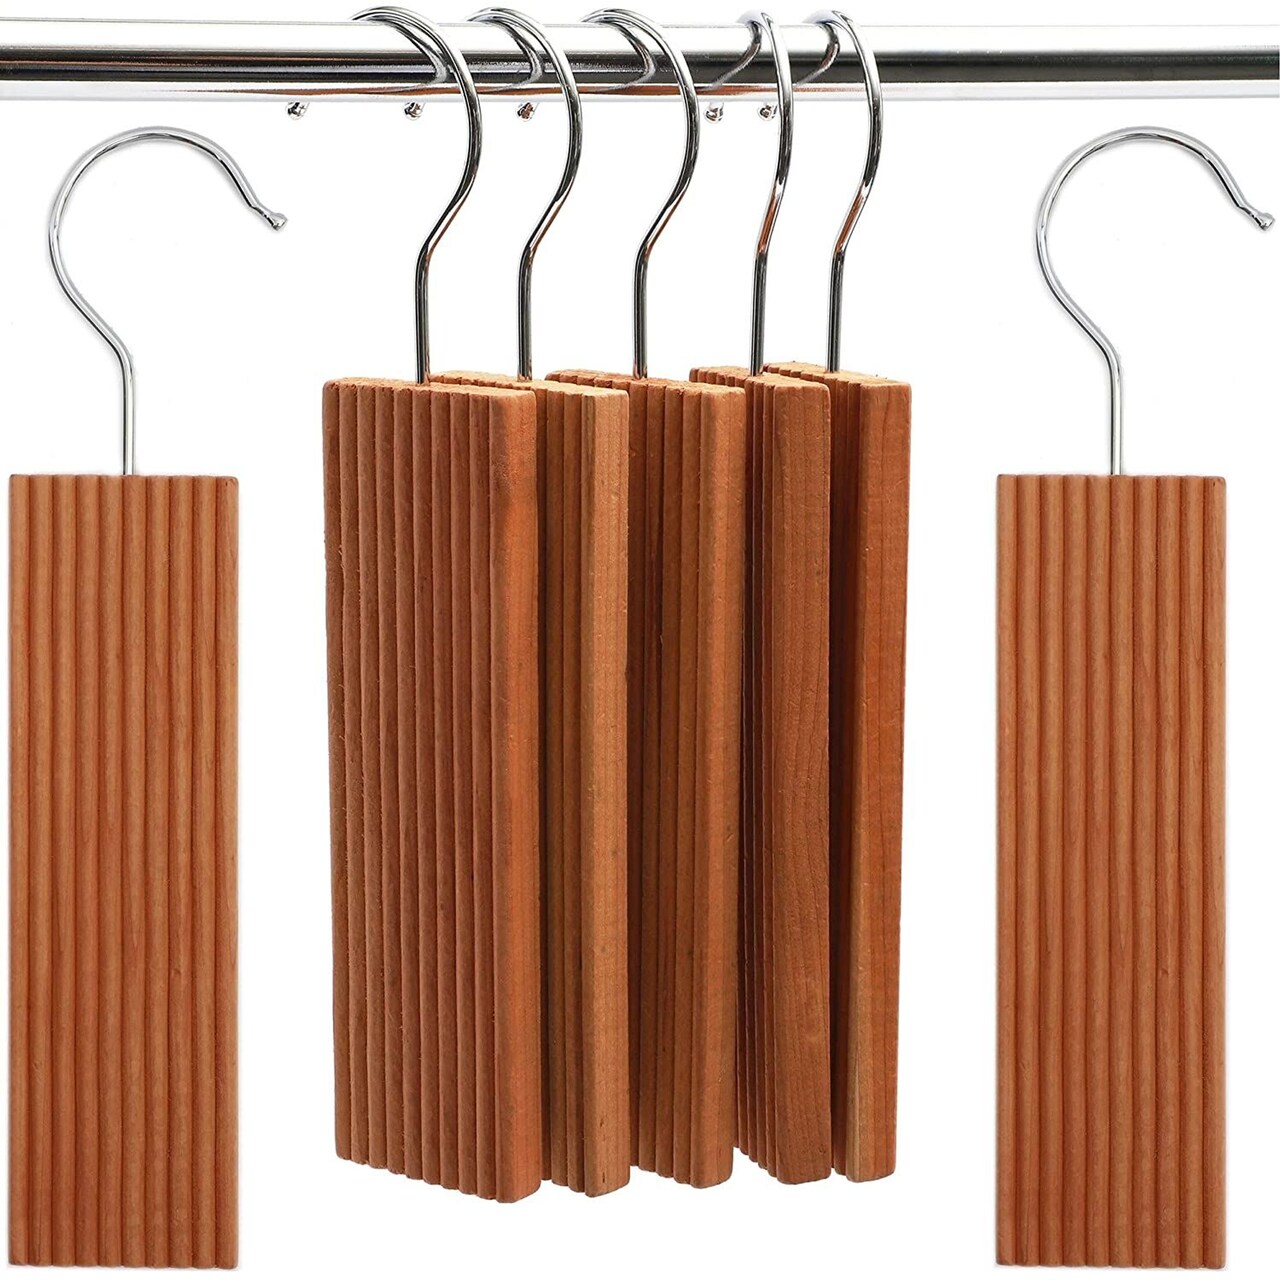 16 Pack Cedar Hangers for Closet Storage, Cedarwood Scented Hanging Blocks  for Clothes (1.8 x 0.4 x 6.5 In)